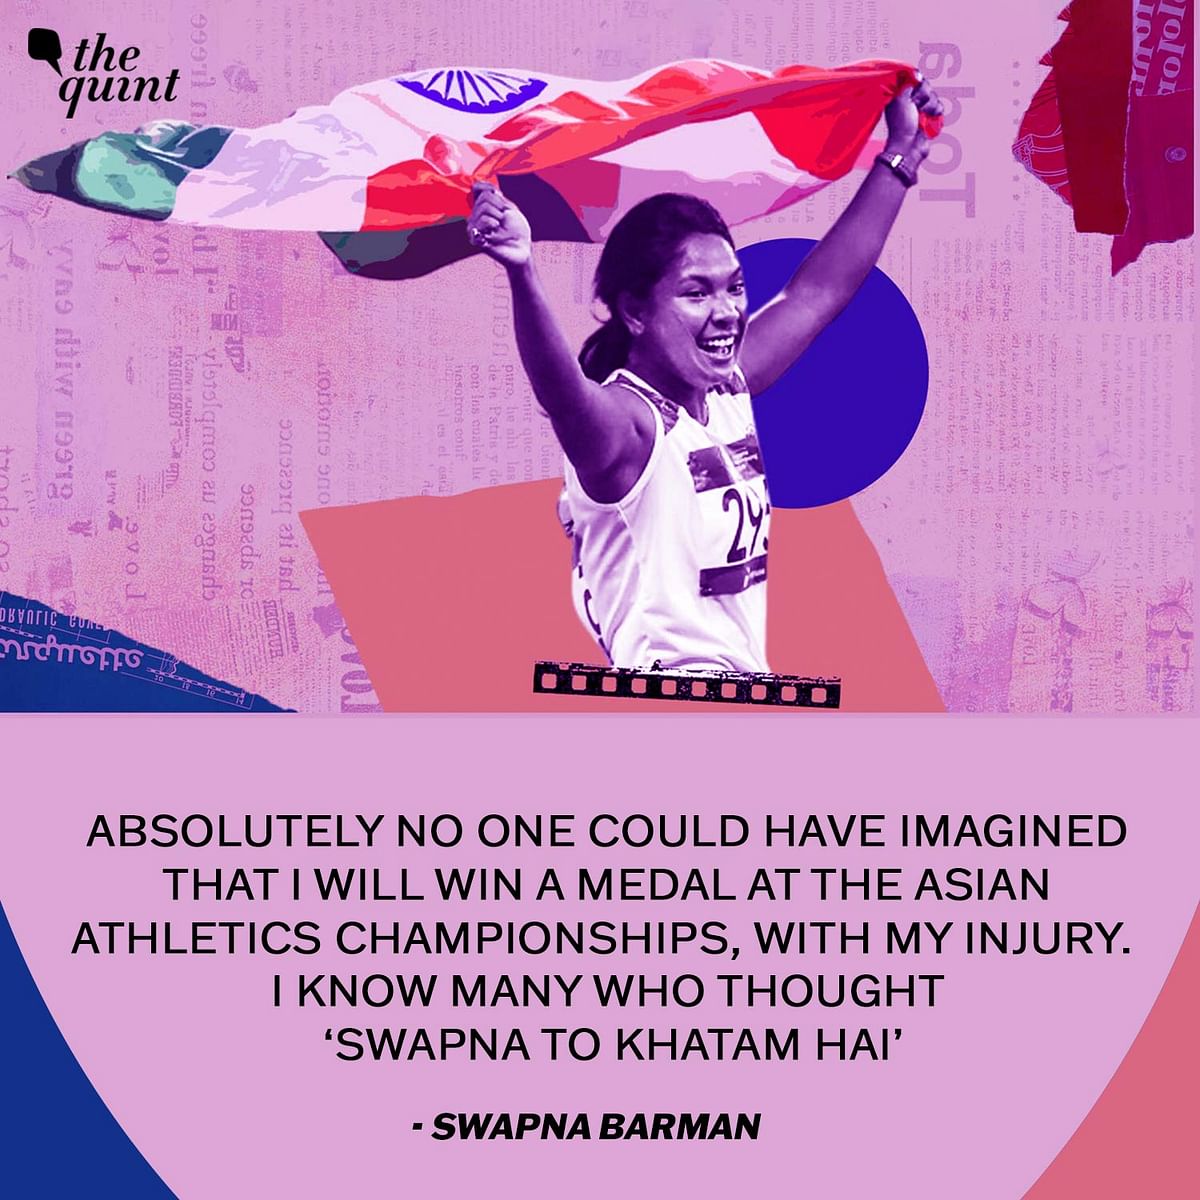 "Hangzhou Asian Games will be my last international competition. I'll compete accordingly," says Swapna Barman.